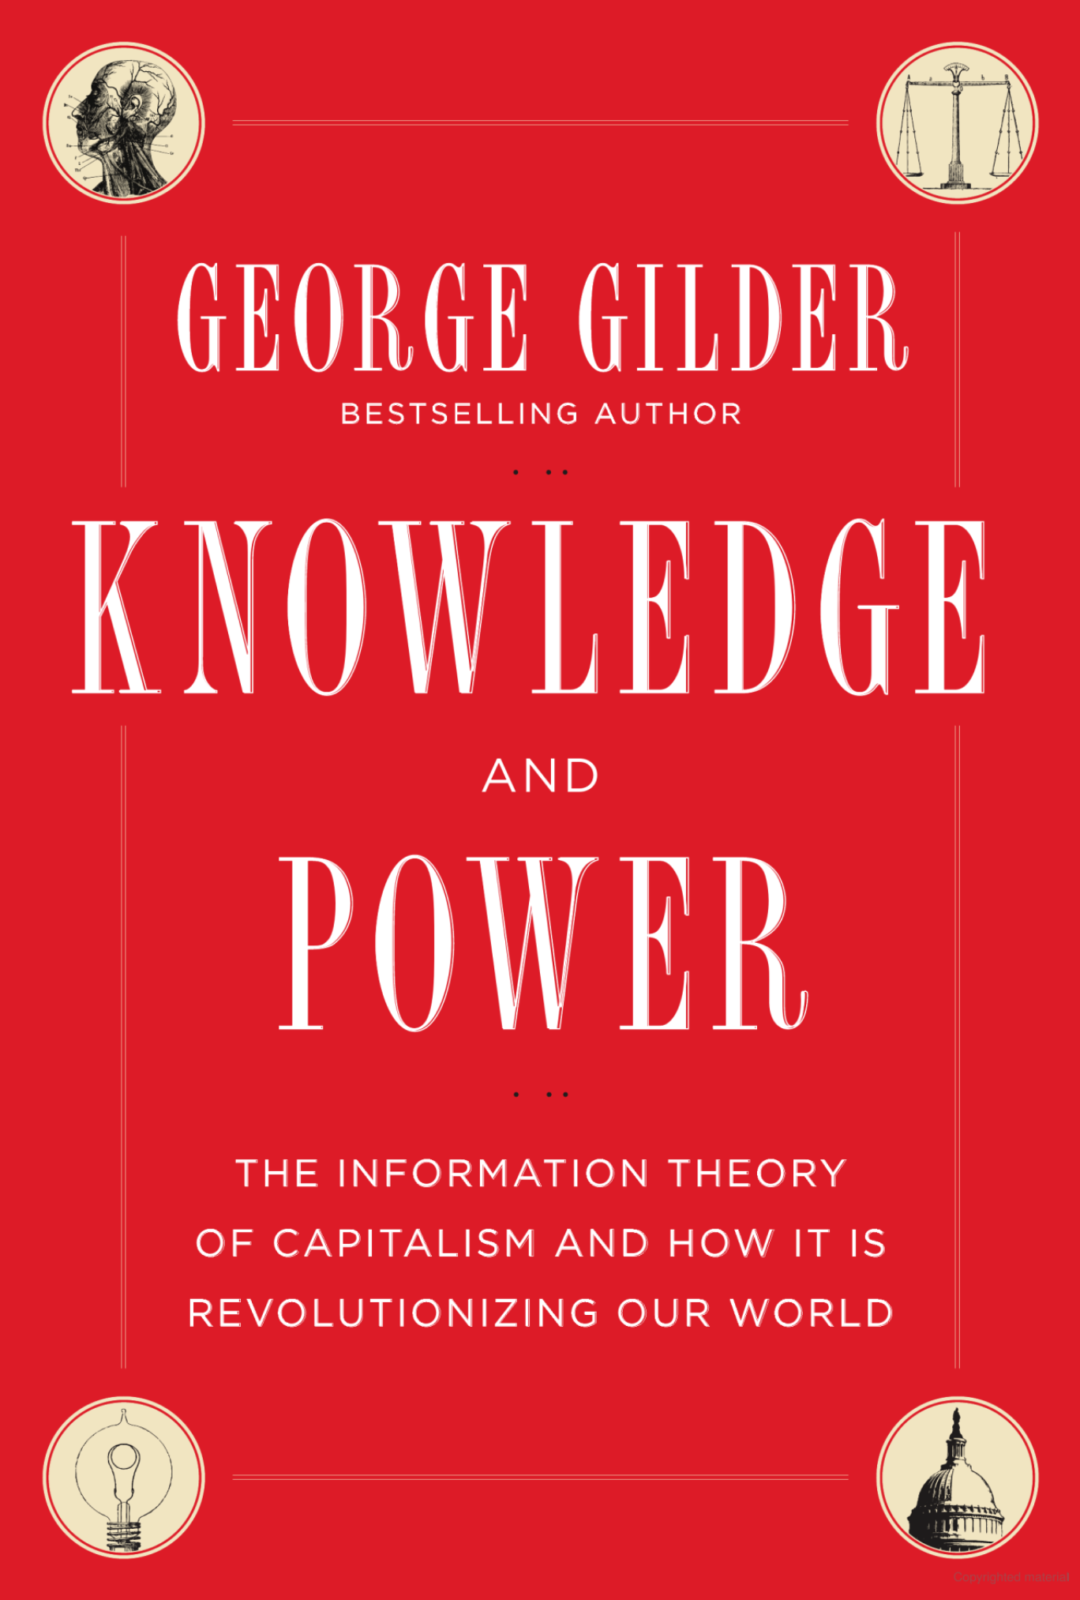 Book cover of Knowledge and Power by George Gilder